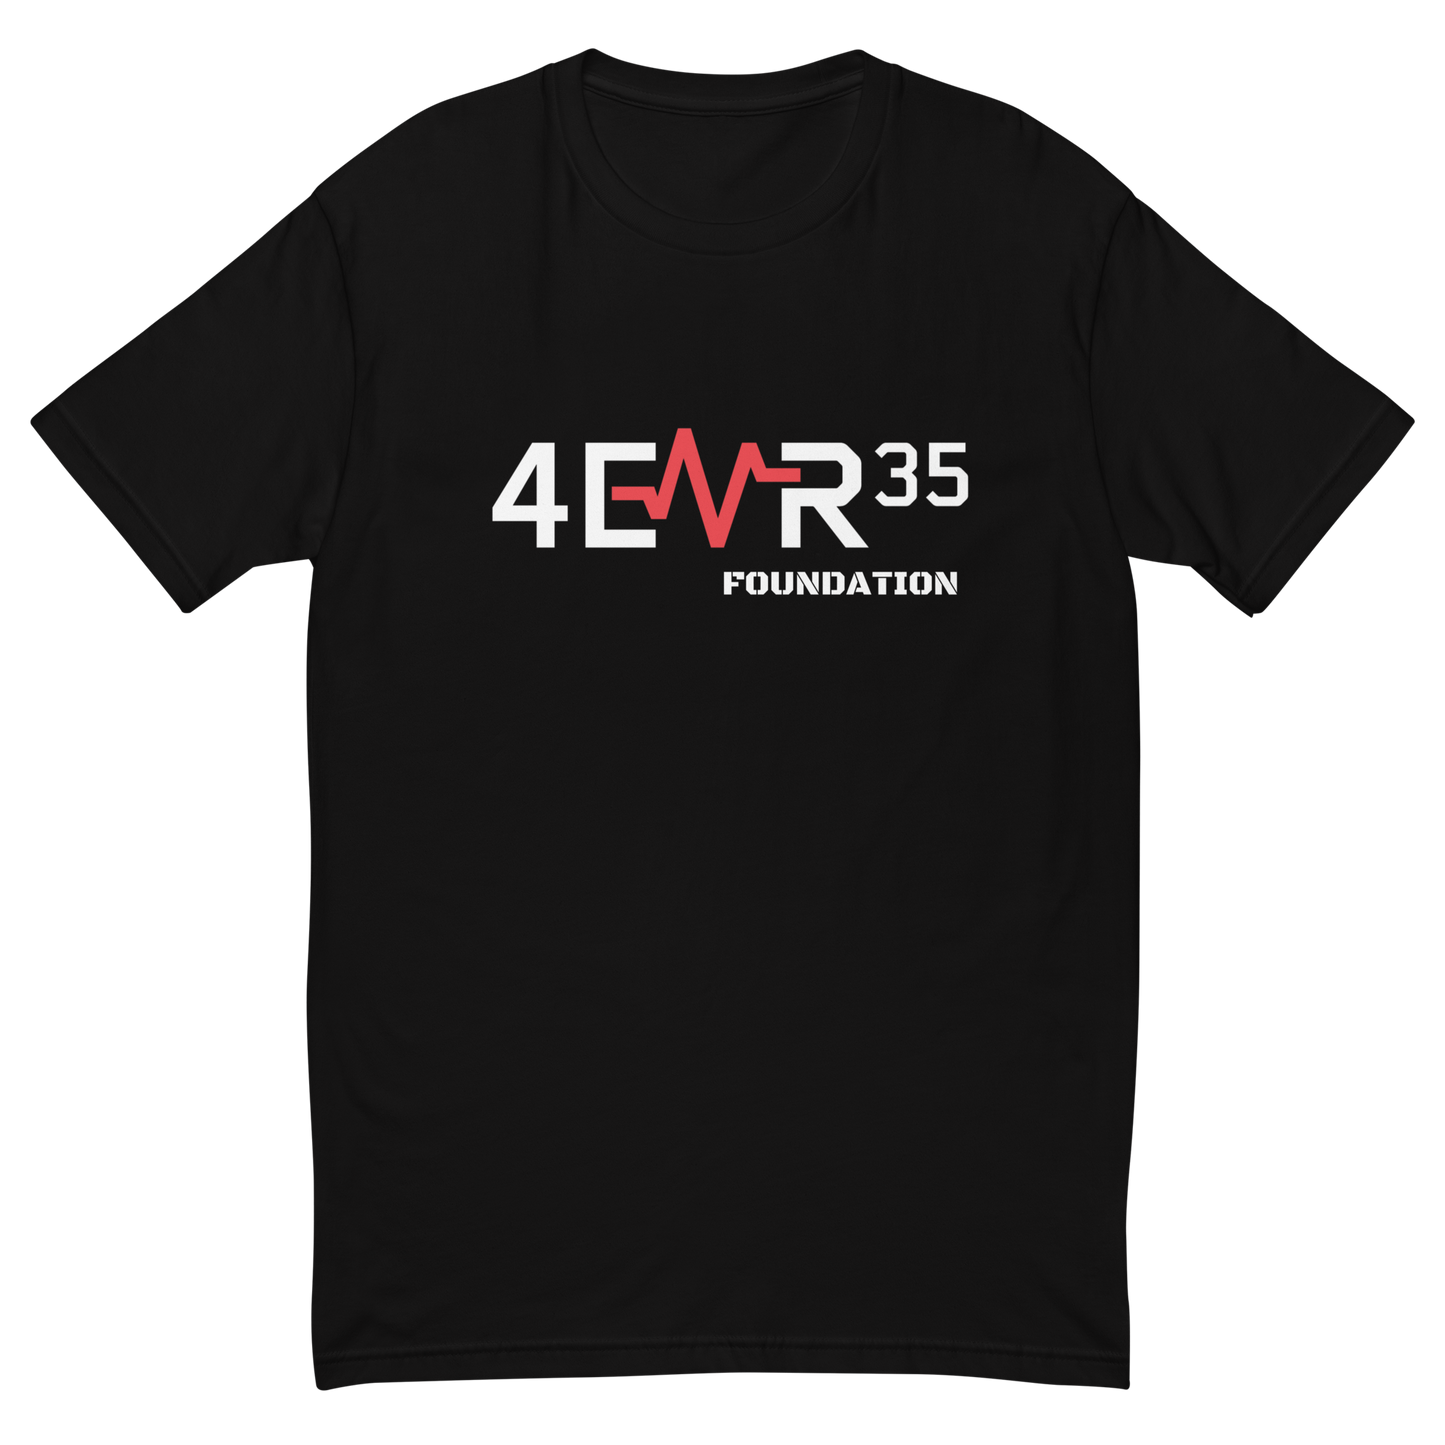 4EVR35 Foundation Graphic T